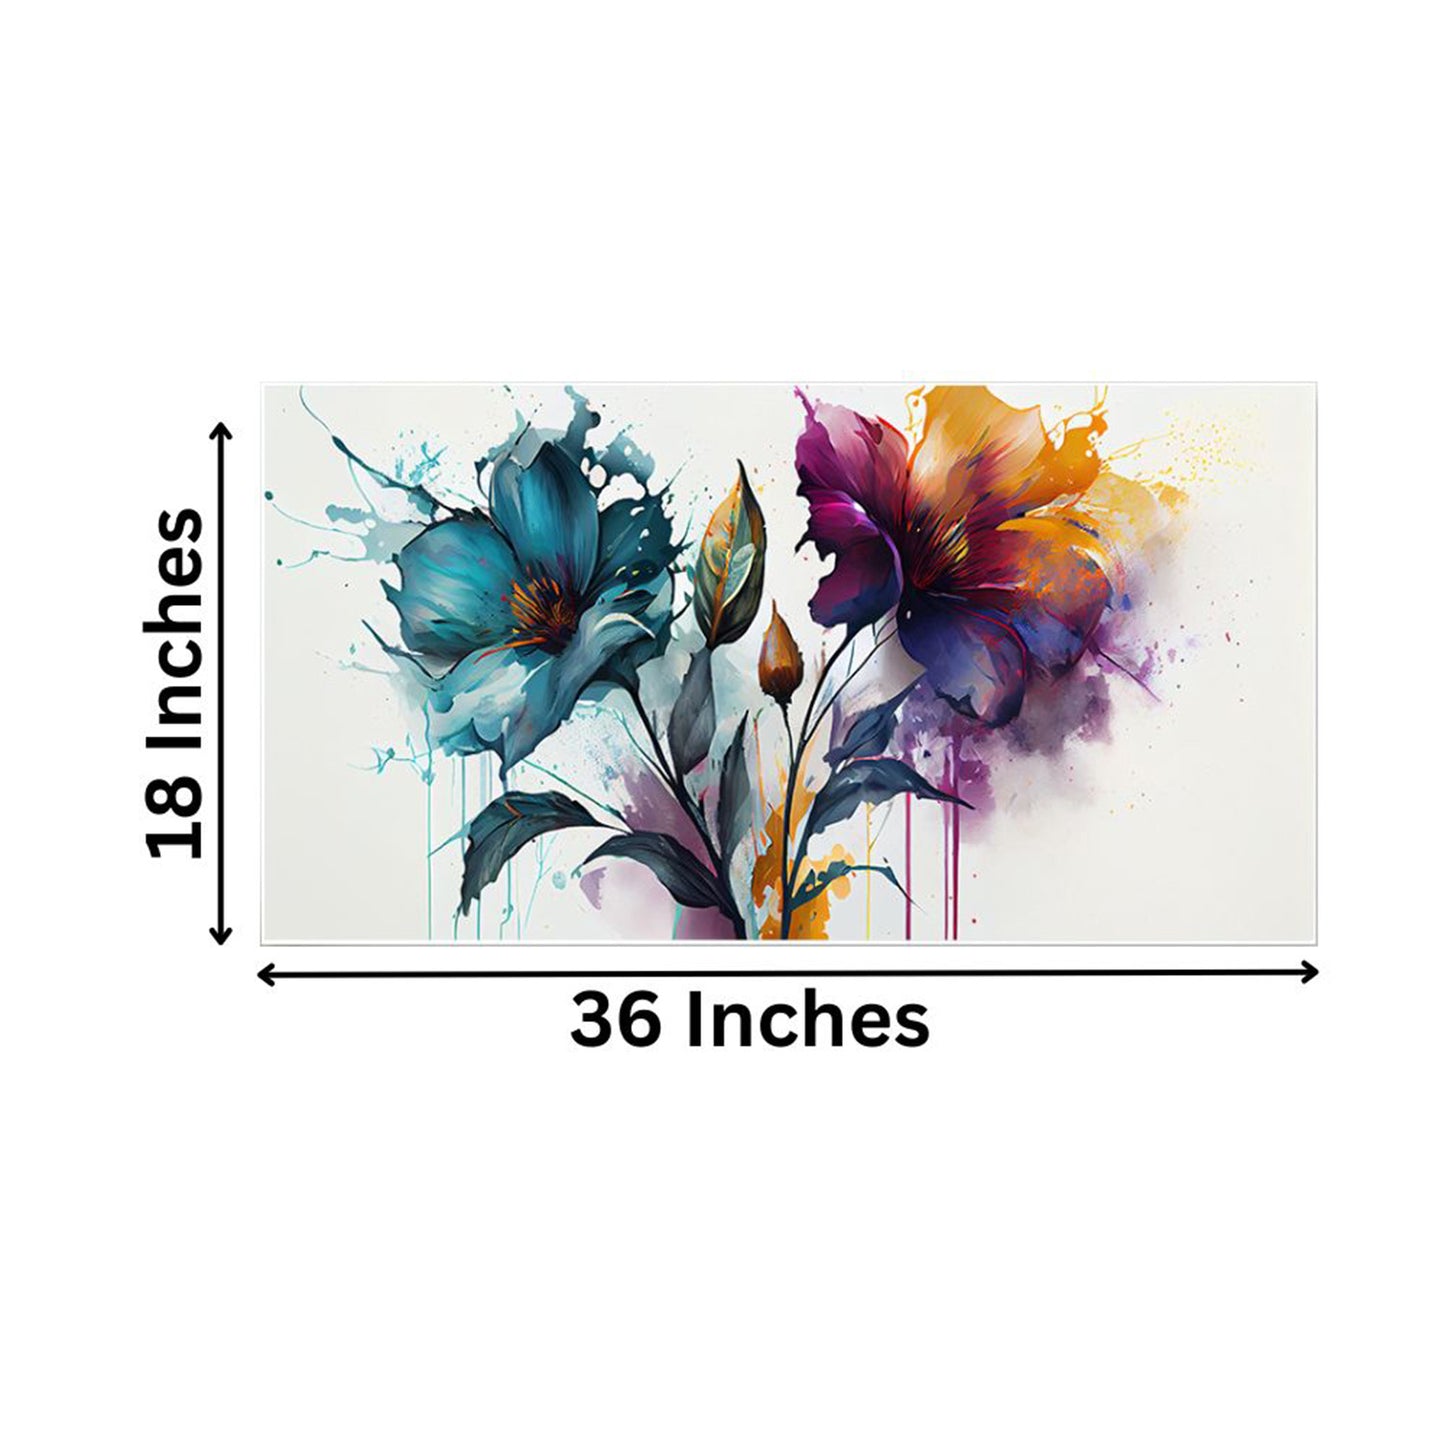 Dynamic Floral Splashes: Vibrant Art Wall Painting